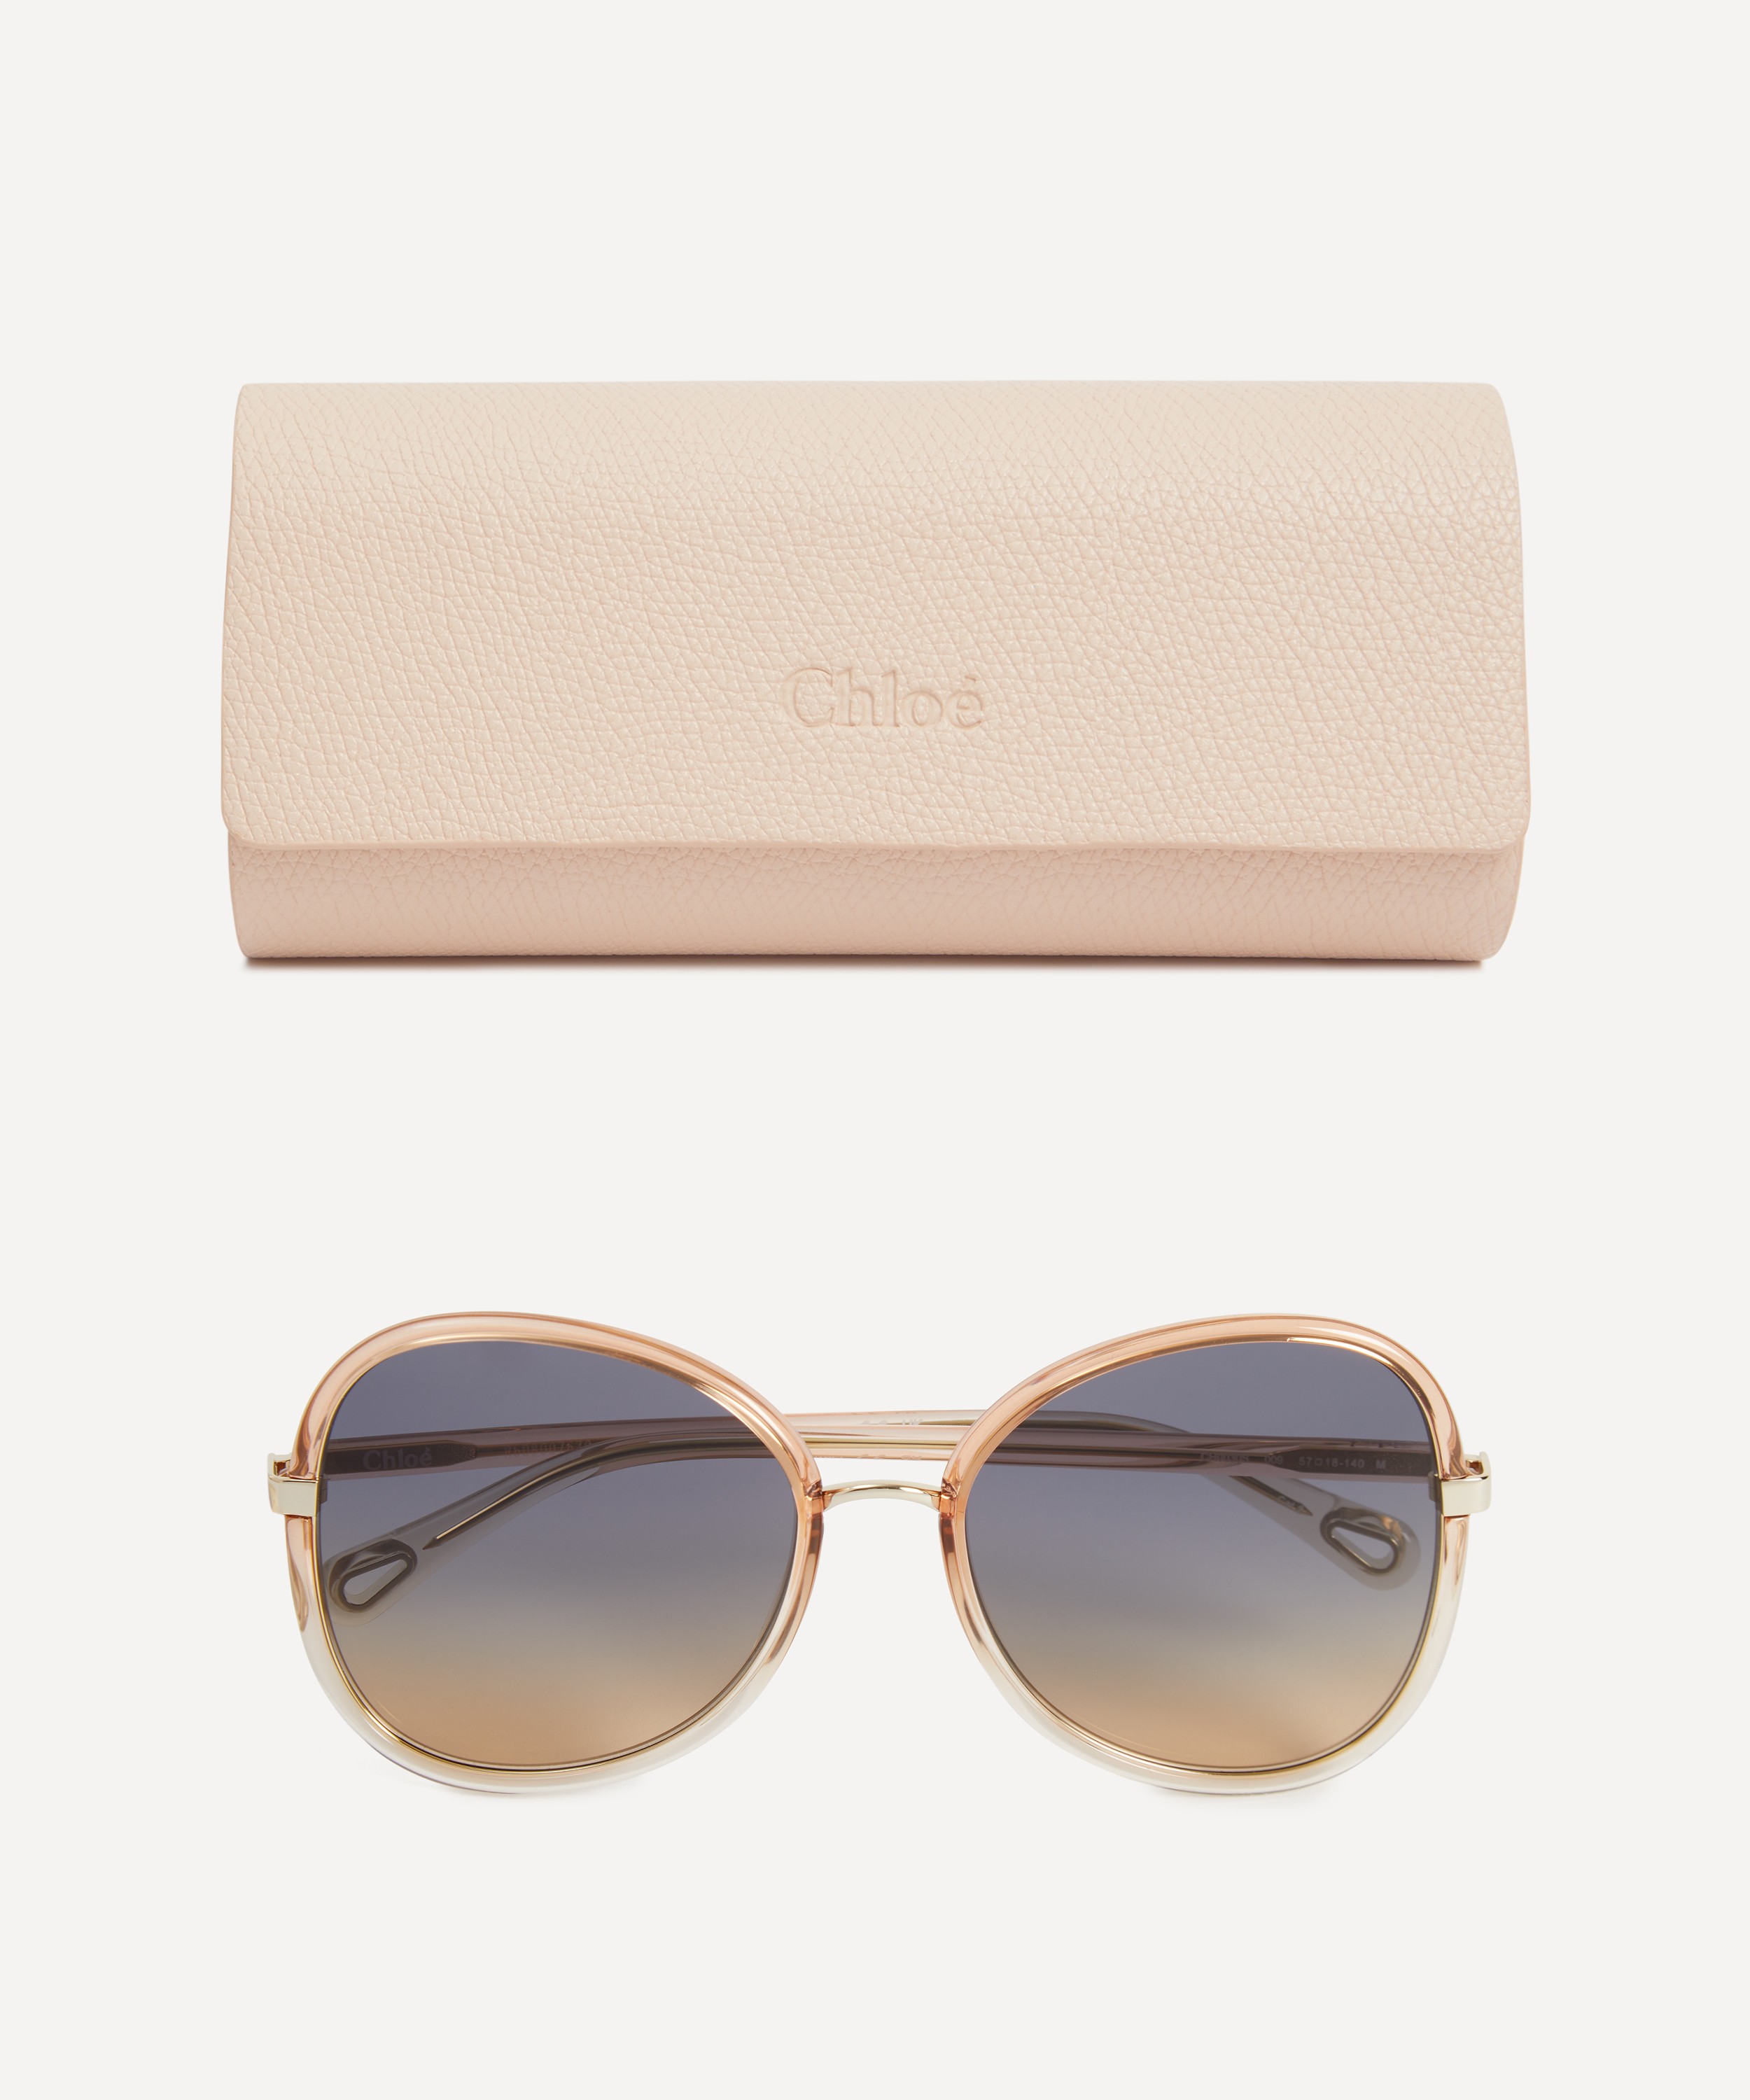 Chloé - Butterfly Sunglasses image number 3